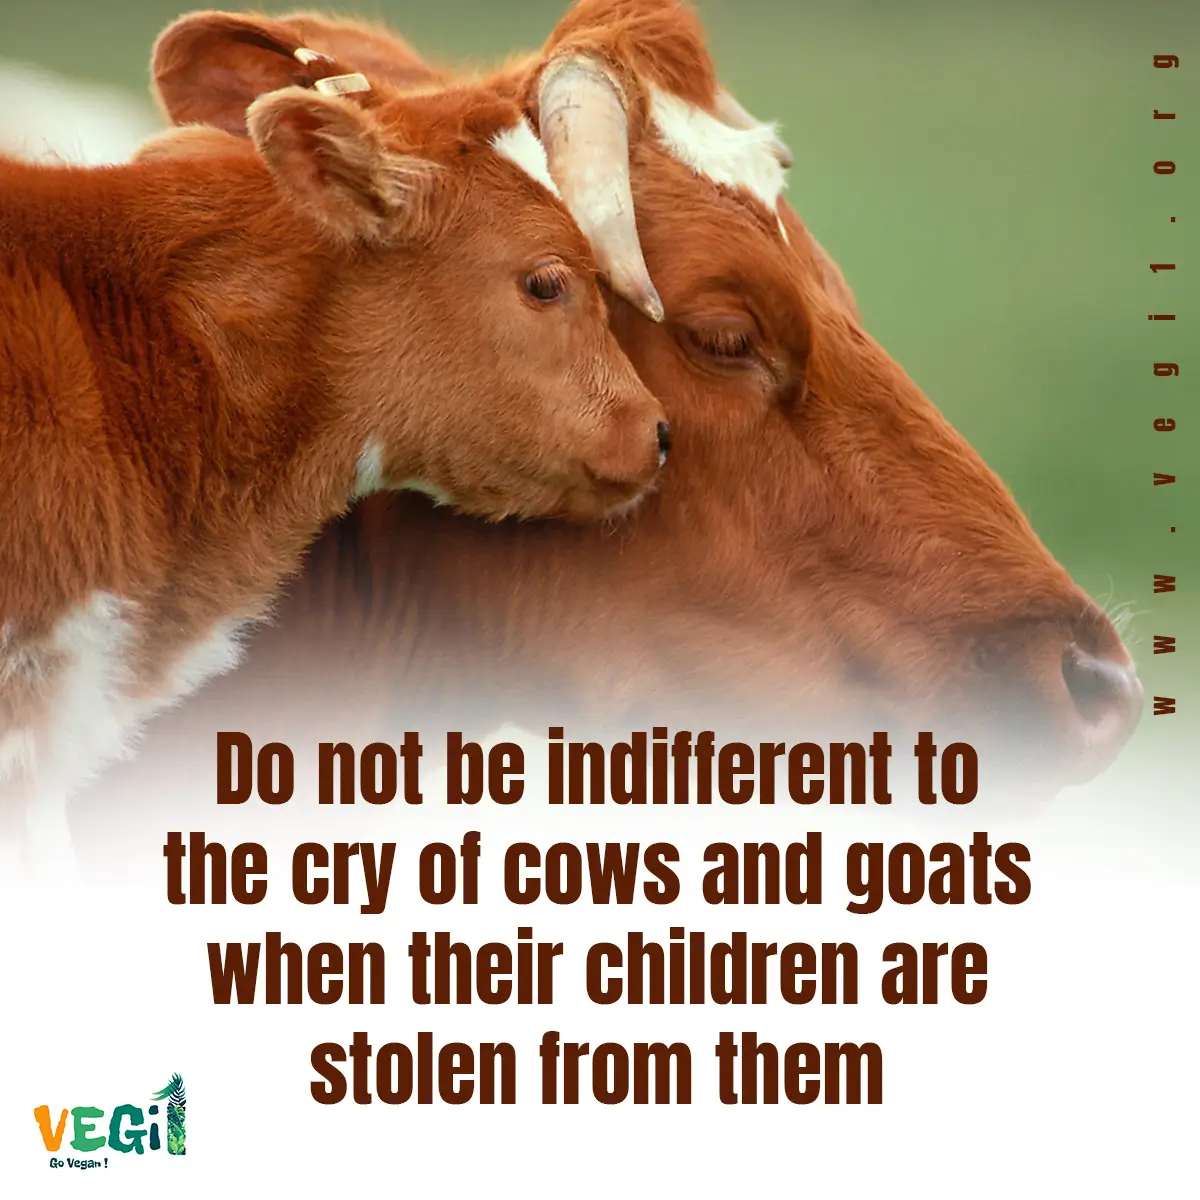 Do not be indifferent to the cry of cows and goats when their children are stolen from them